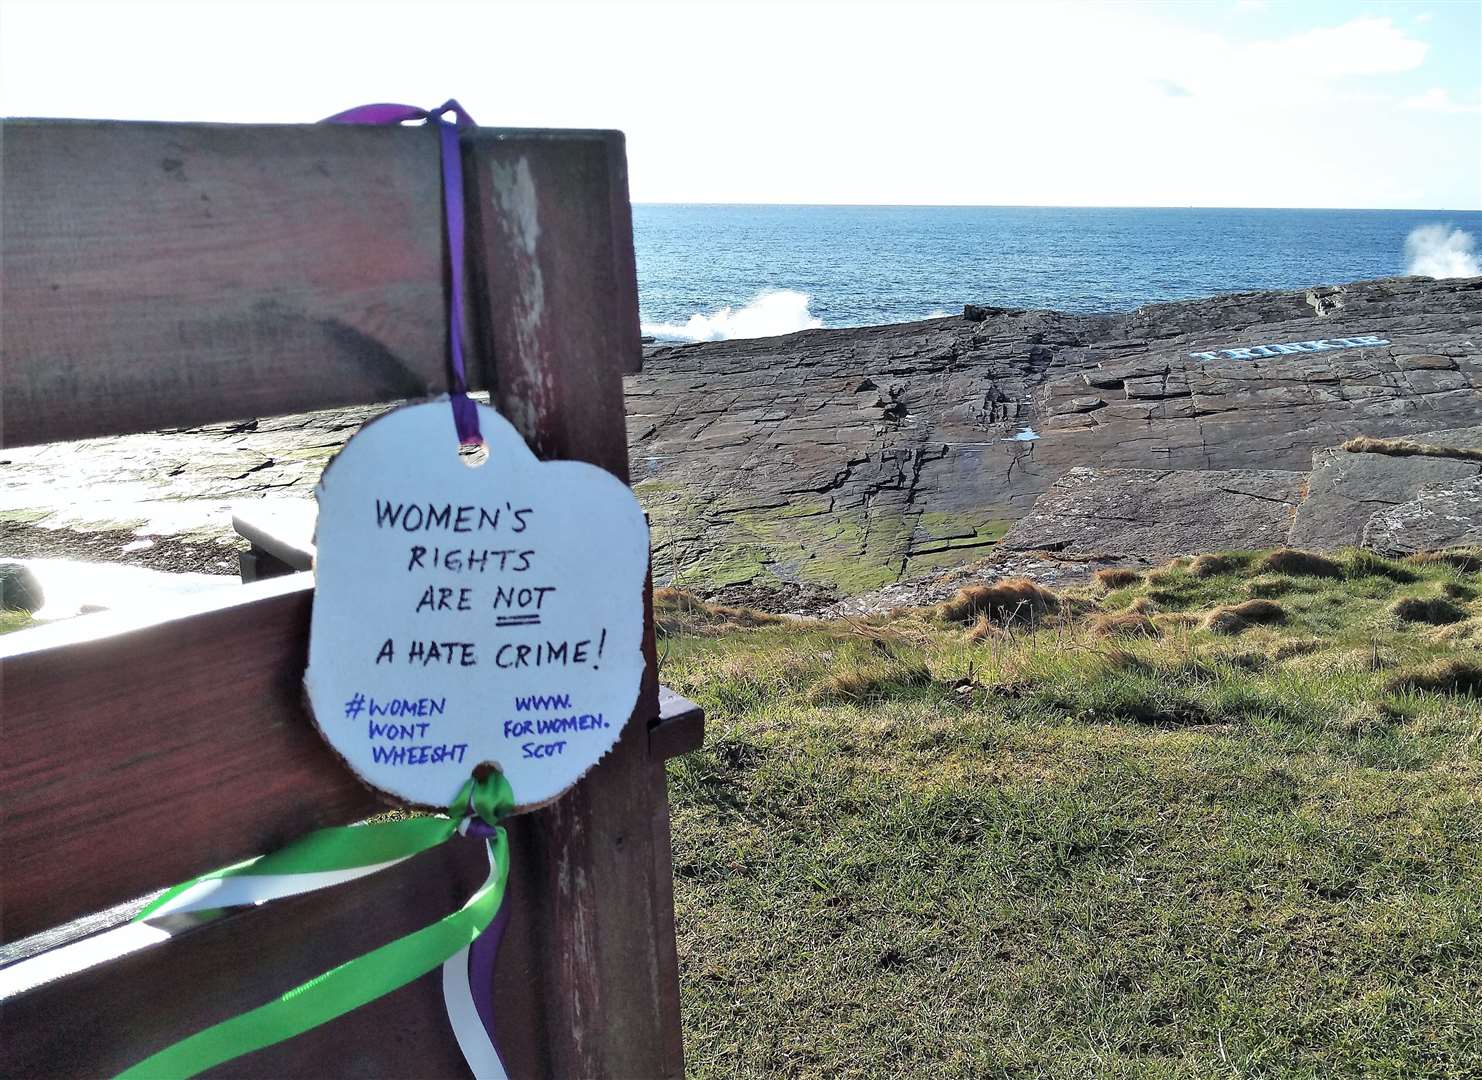 Women's rights medallion with ribbons set up at the Trinkie recently which also has the same message Trina drew out #WomenWontWheest. Another was also spotted near Reiss beach.